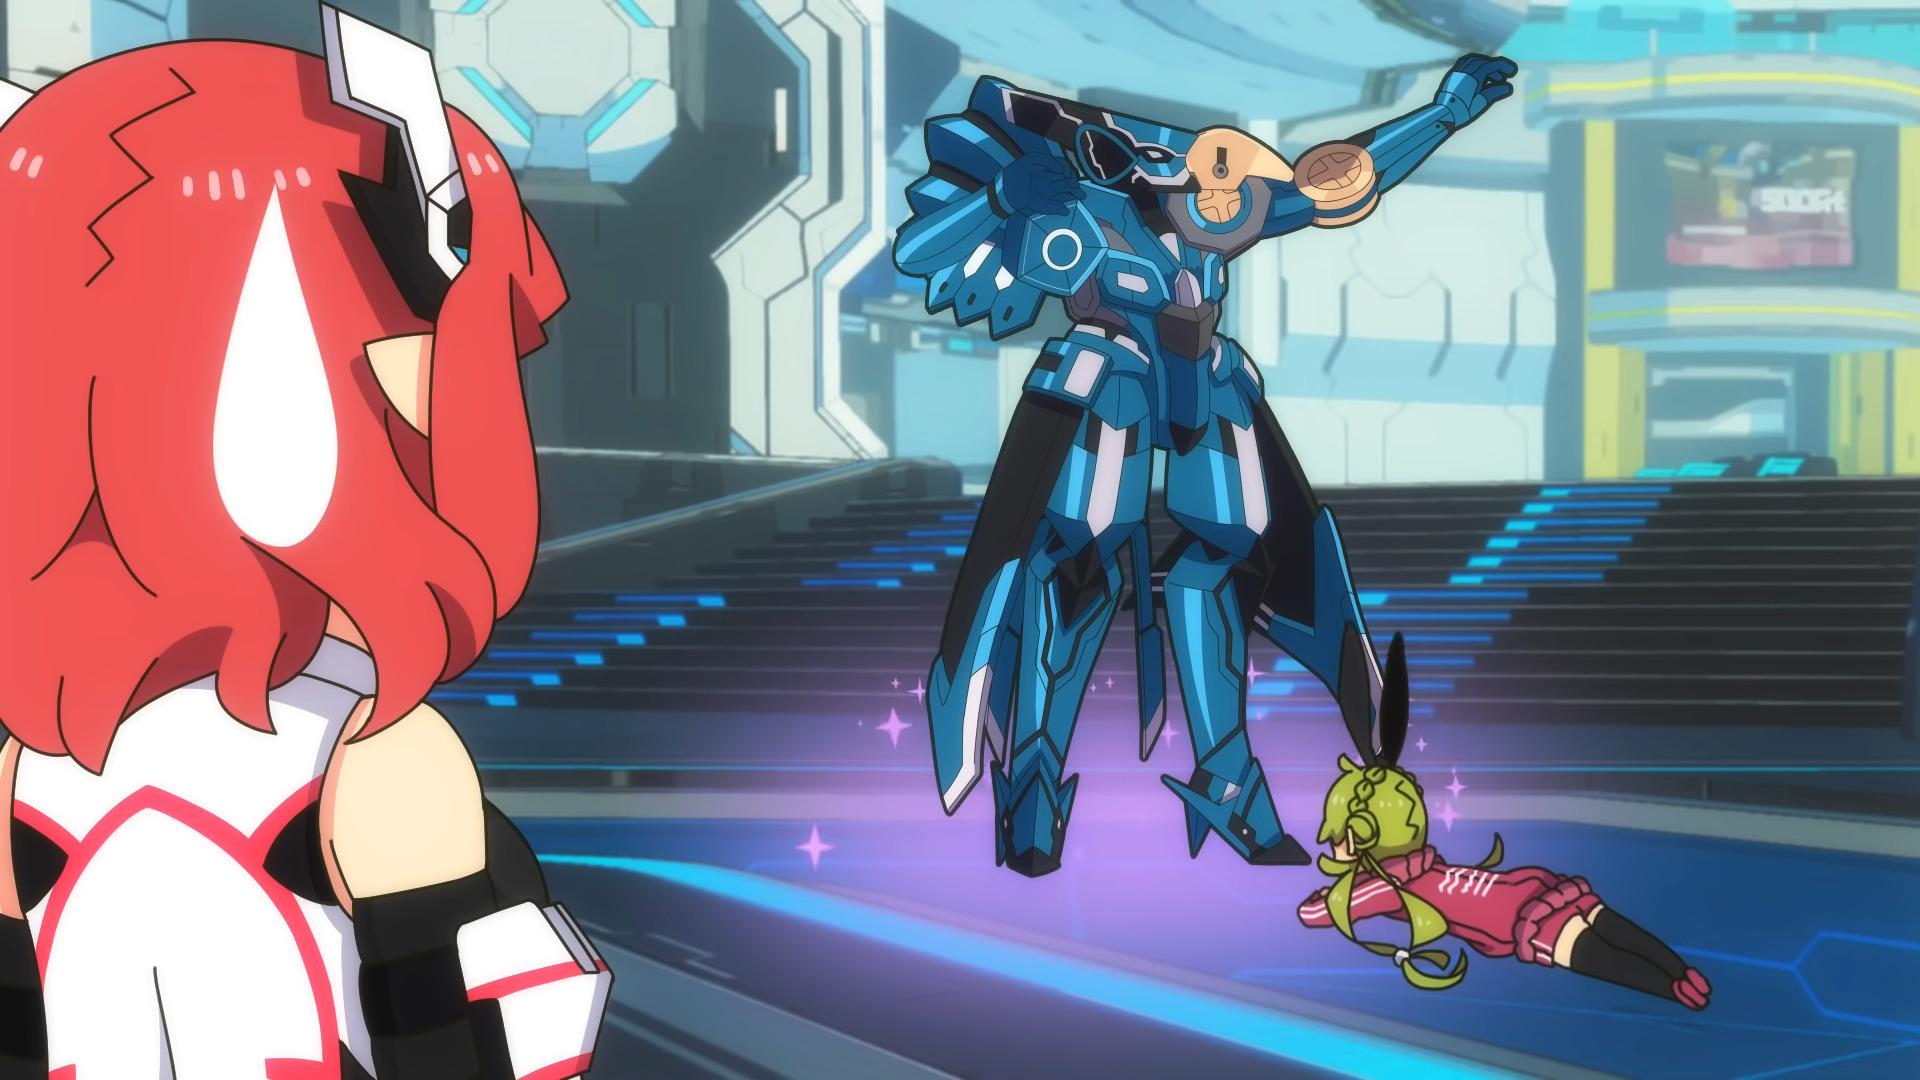 Phantasy Star Online 2: The Animation Discussion